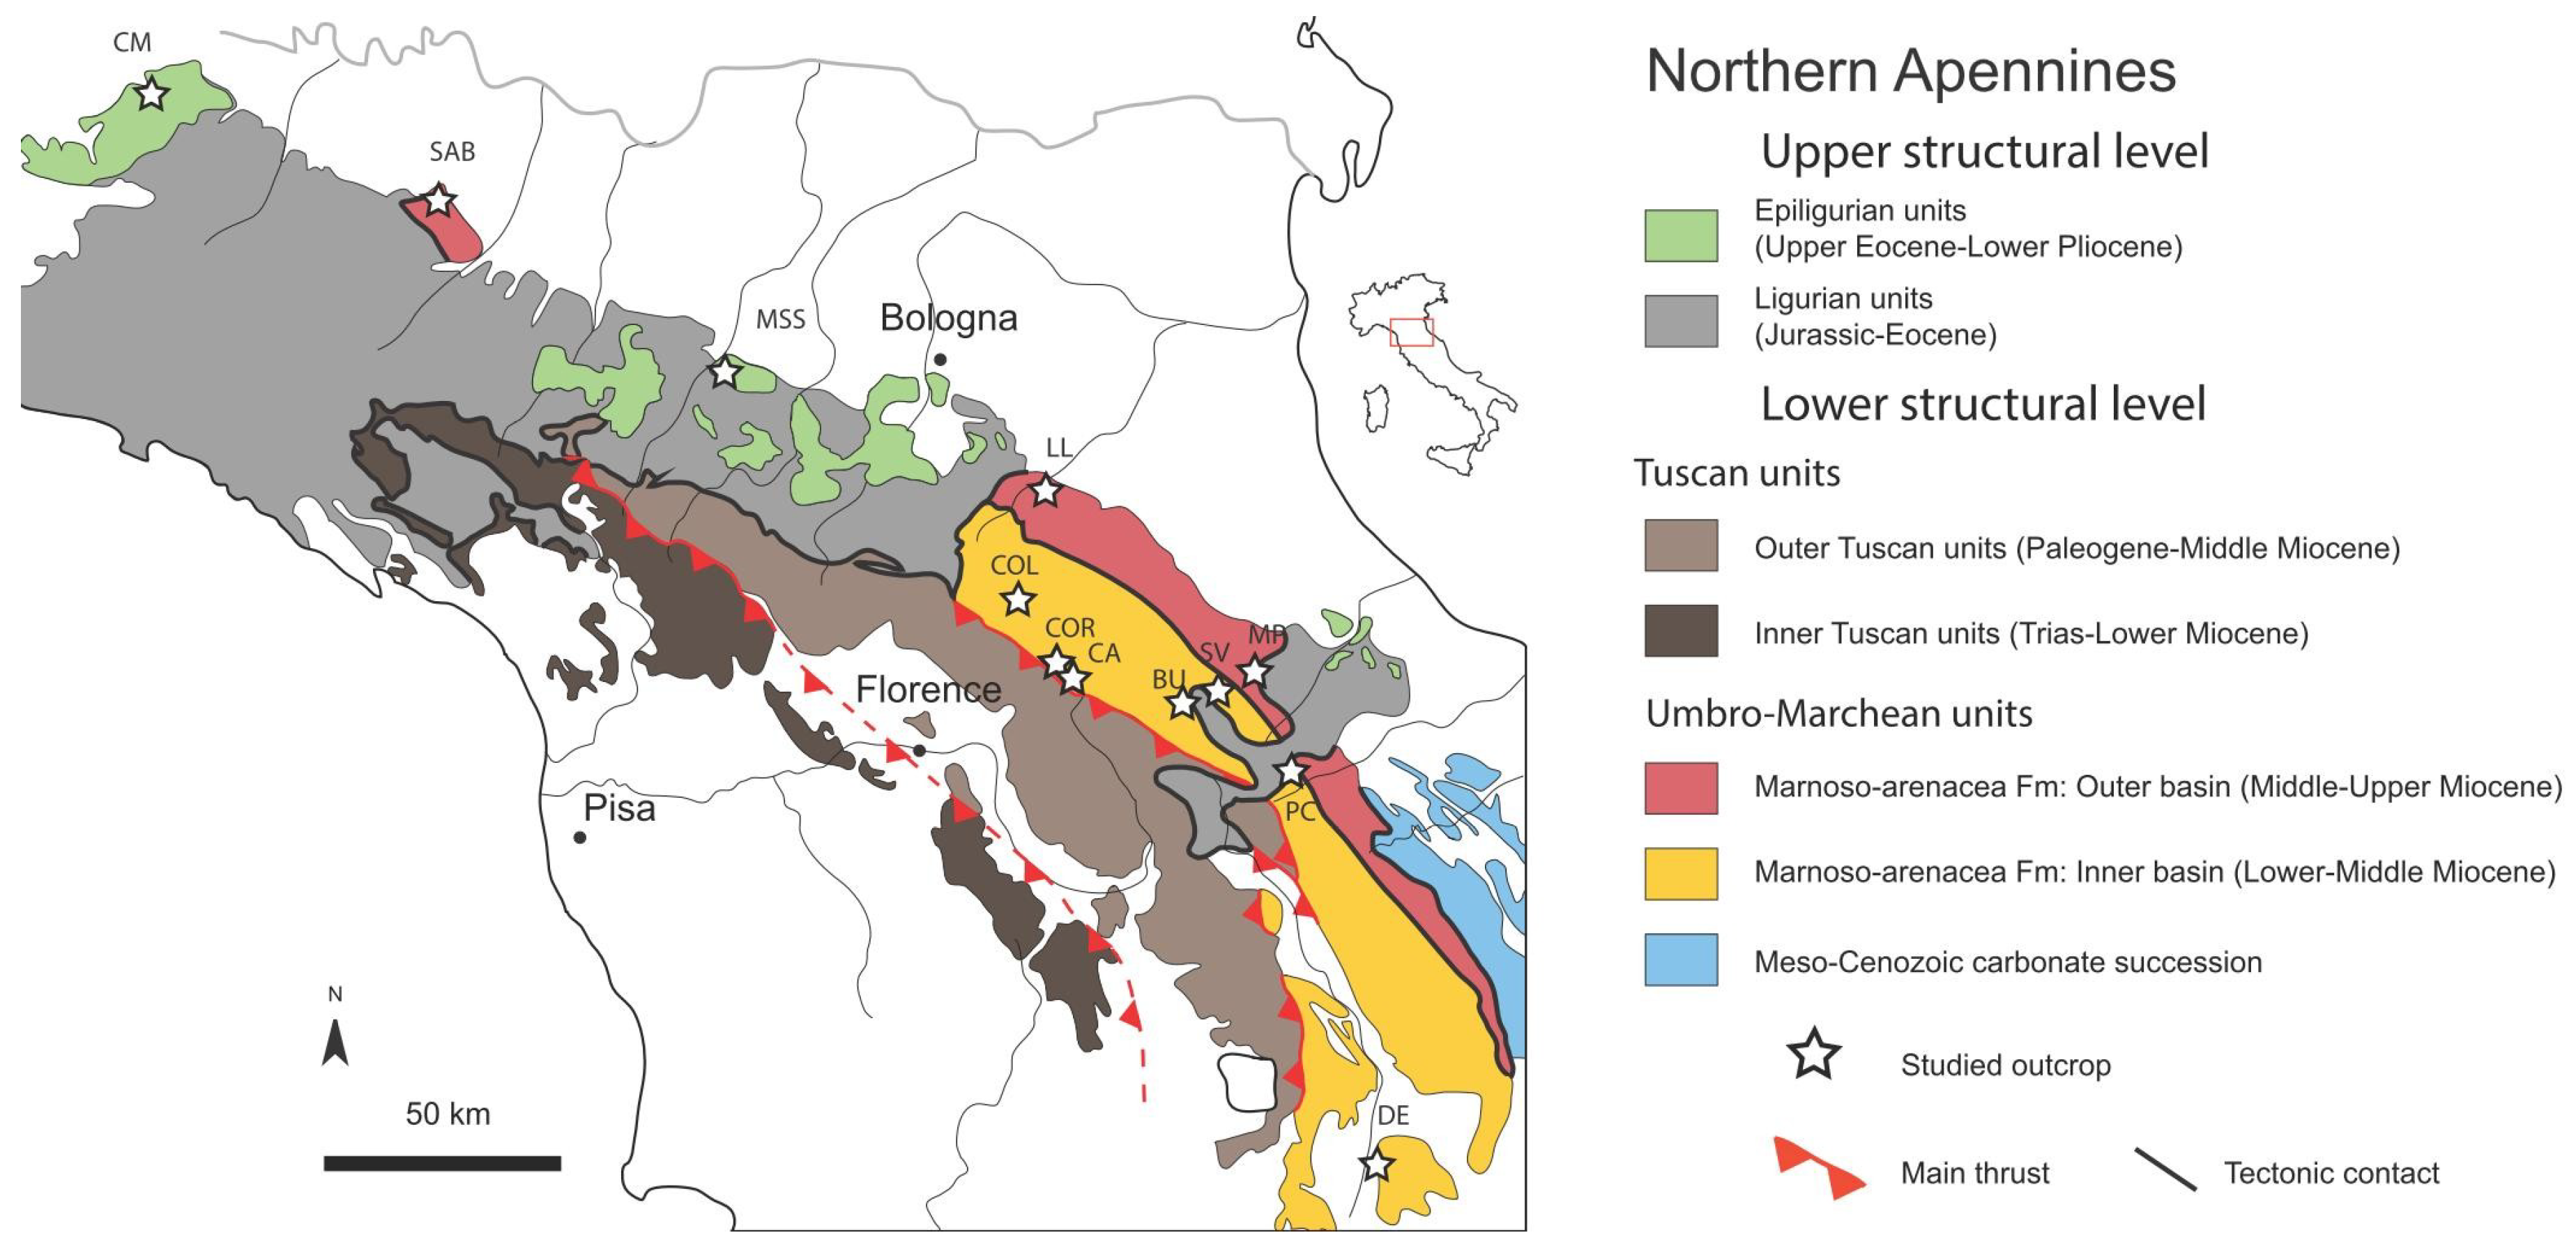 Geosciences | Free Full-Text | Evidences for Paleo-Gas Hydrate Occurrence:  What We Can Infer for the Miocene of the Northern Apennines (Italy)